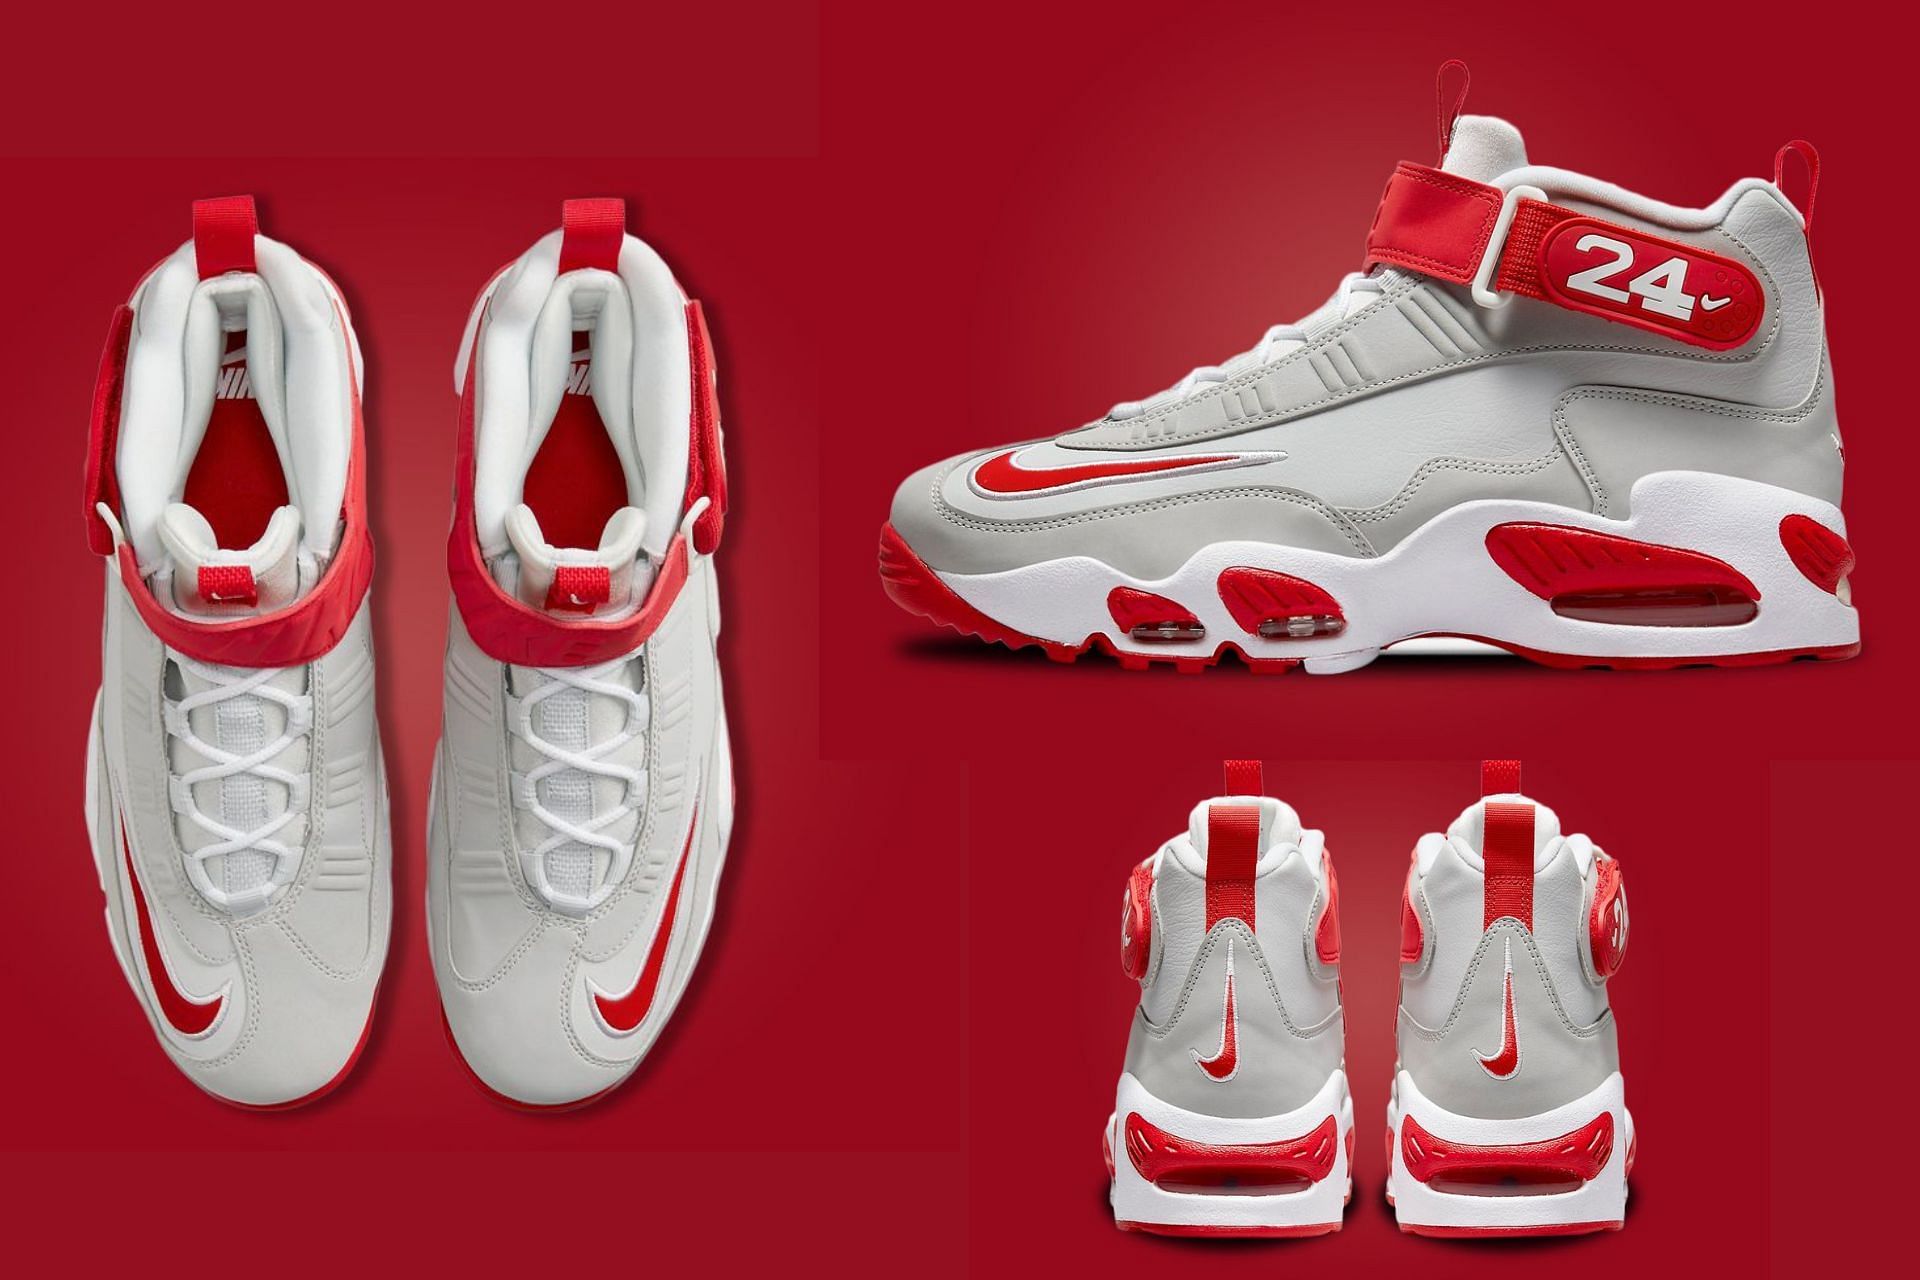 Sneaker Files on Instagram: Like if you would like to see the Nike Air  Griffey Max 1 'Cincinnati Reds' return. Follow @sneakerfiles for more  sneaker news.